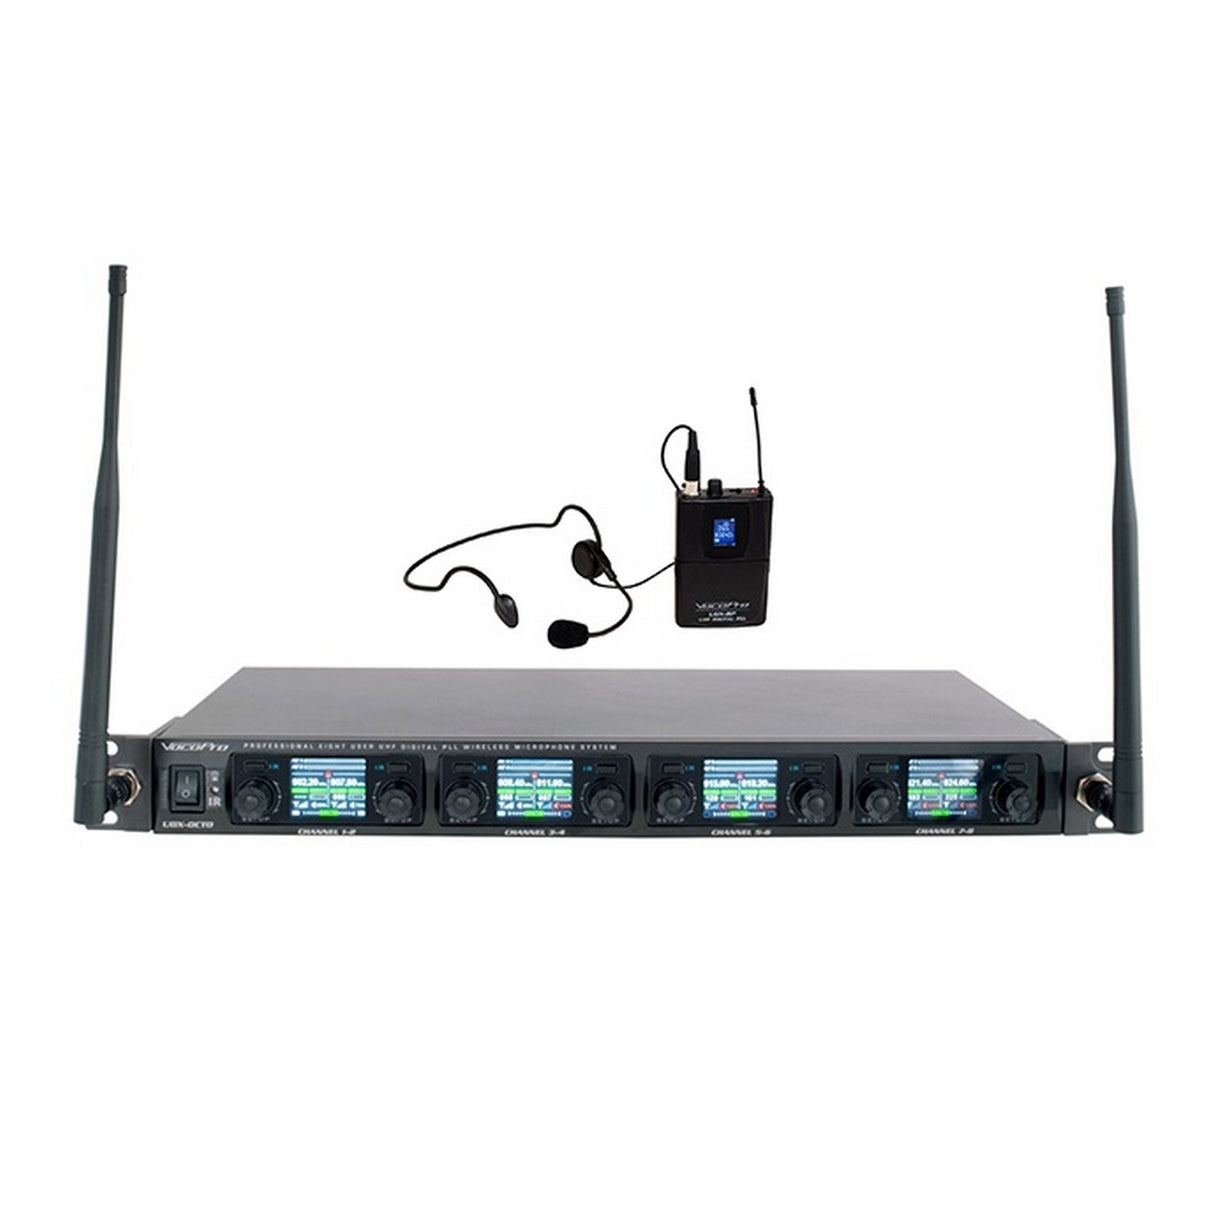 VocoPro UDX-Play-24 24-User PLL Professional Digital Wireless Headset Microphone System